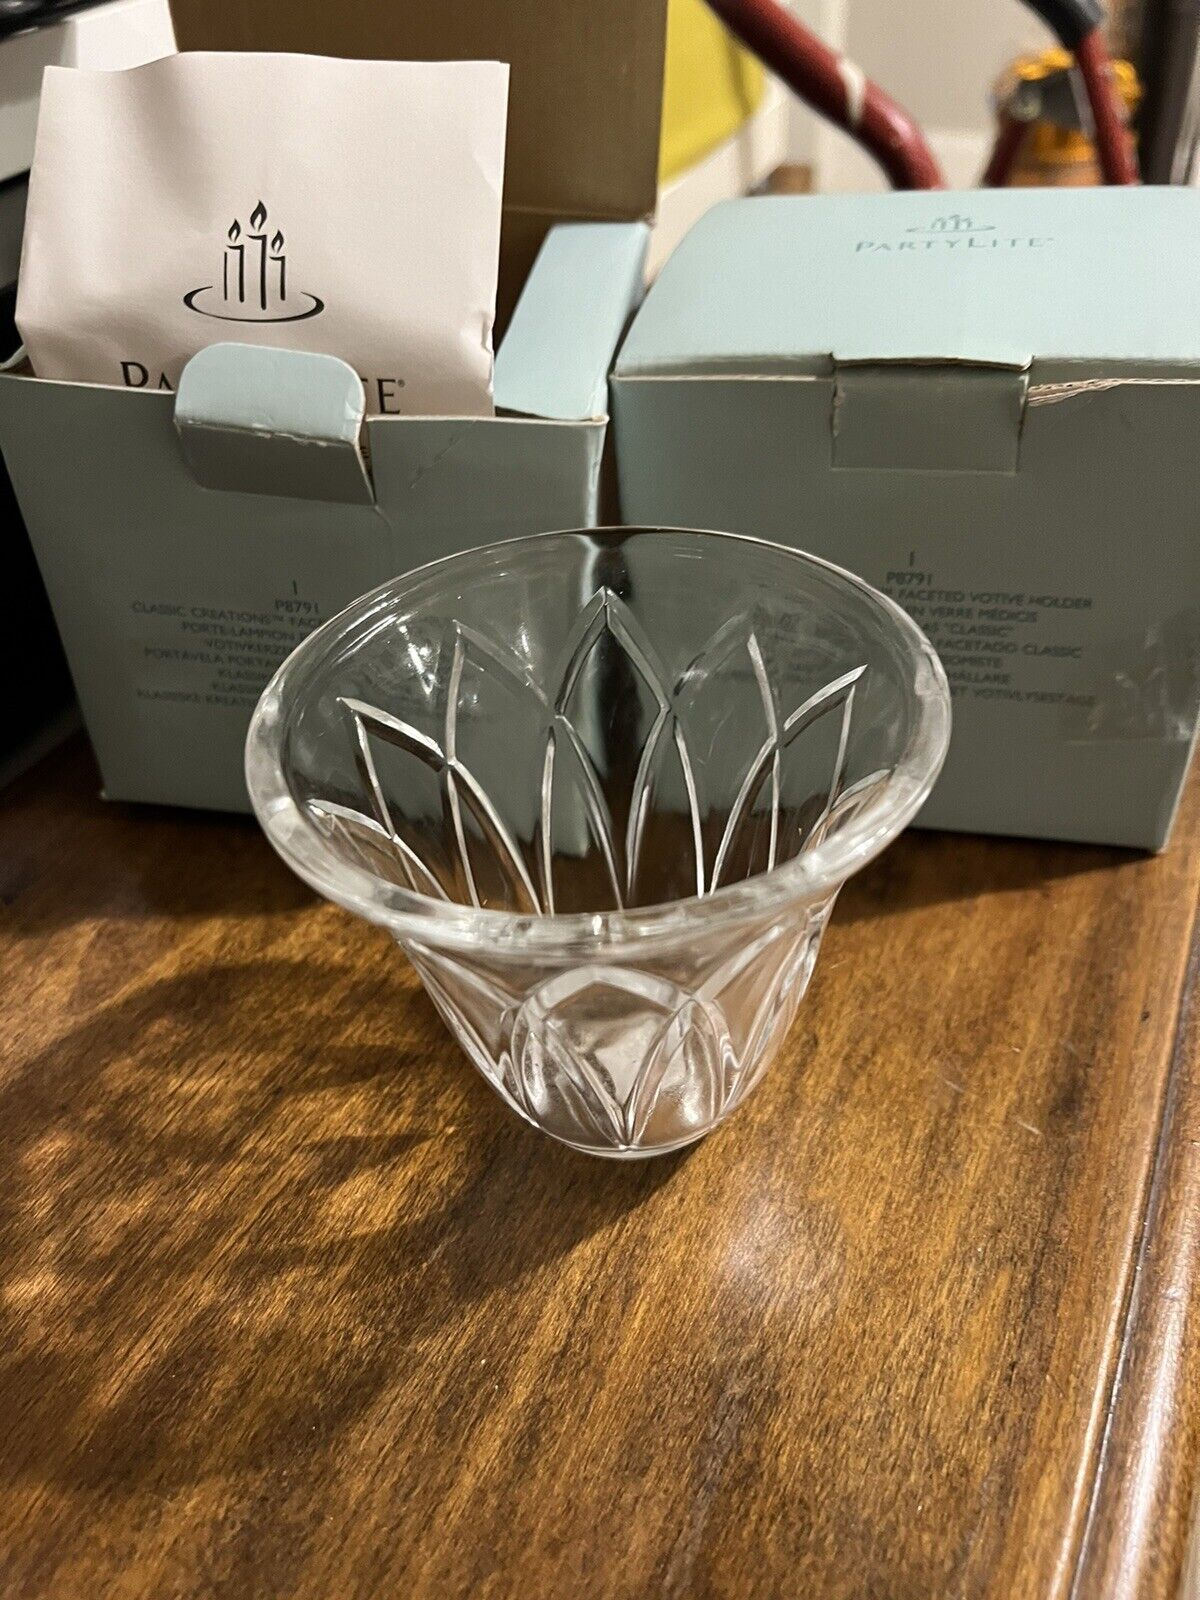 PartyLite Classic Creations Faceted Votive Holder With Box P8791